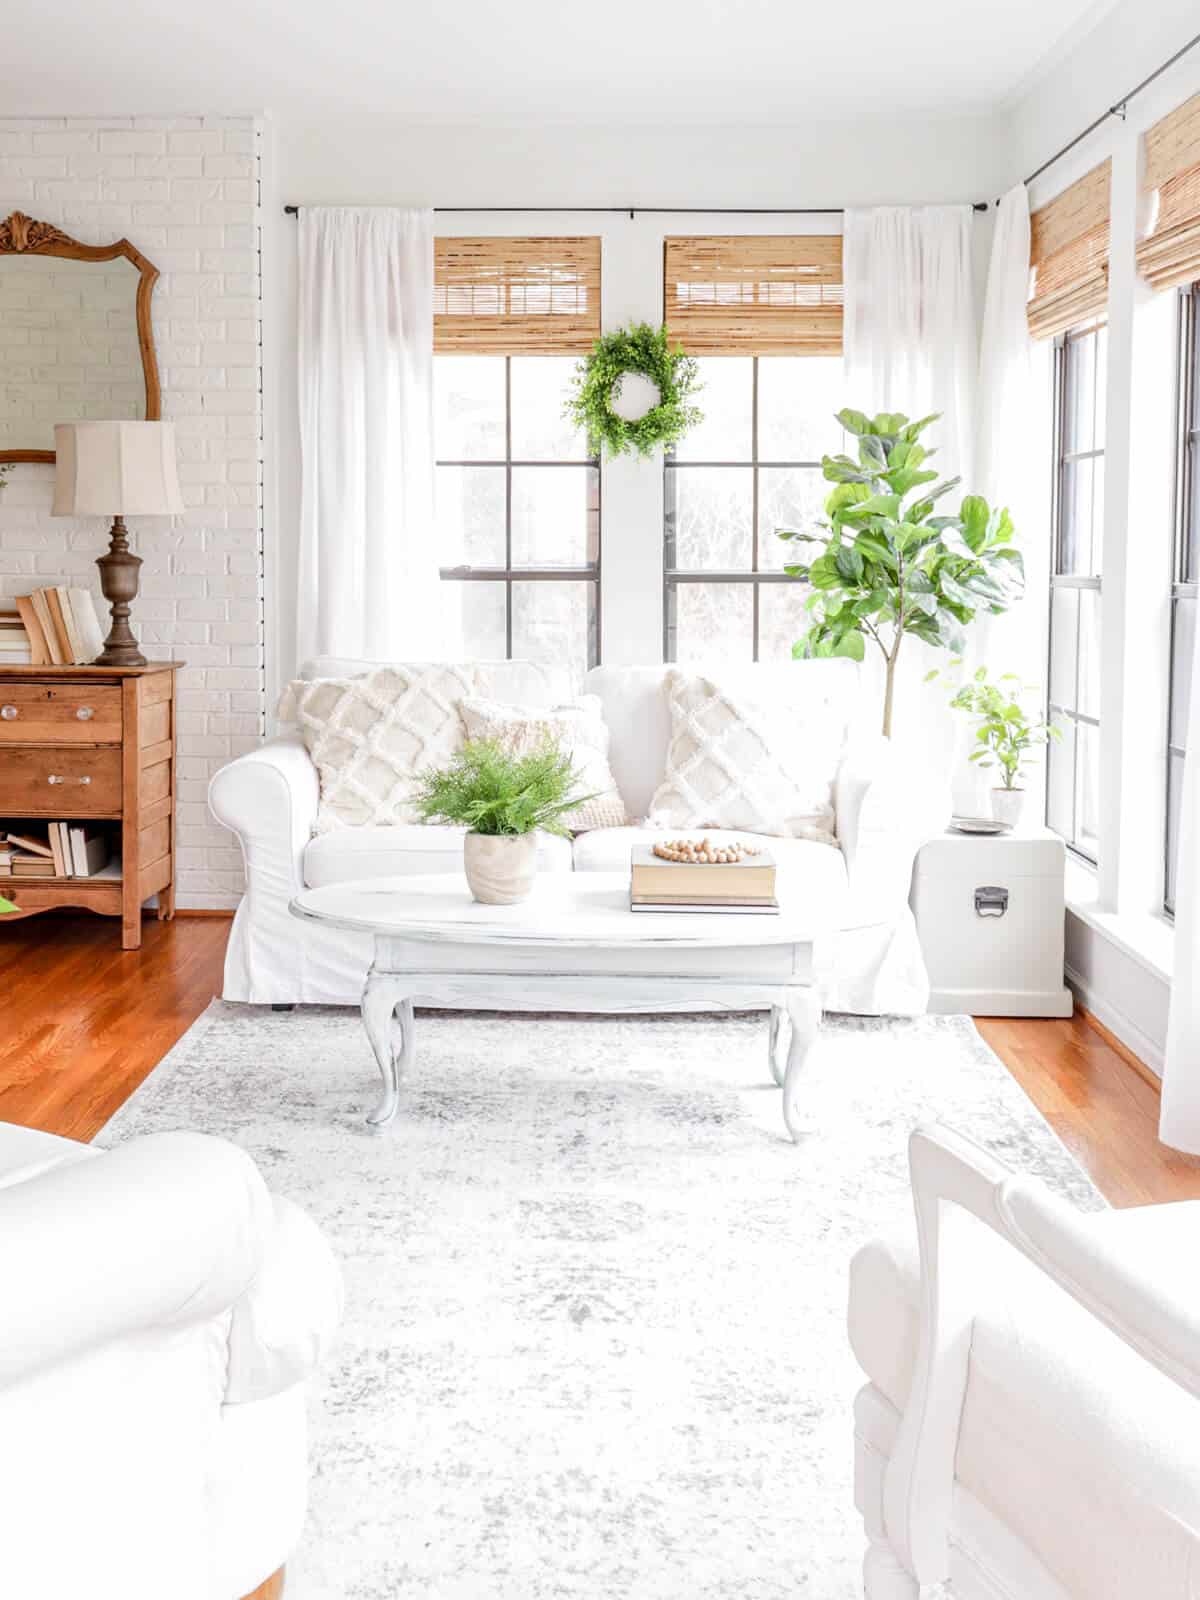 white slipcovered sofa in a sunroom with greenery and woven window shades